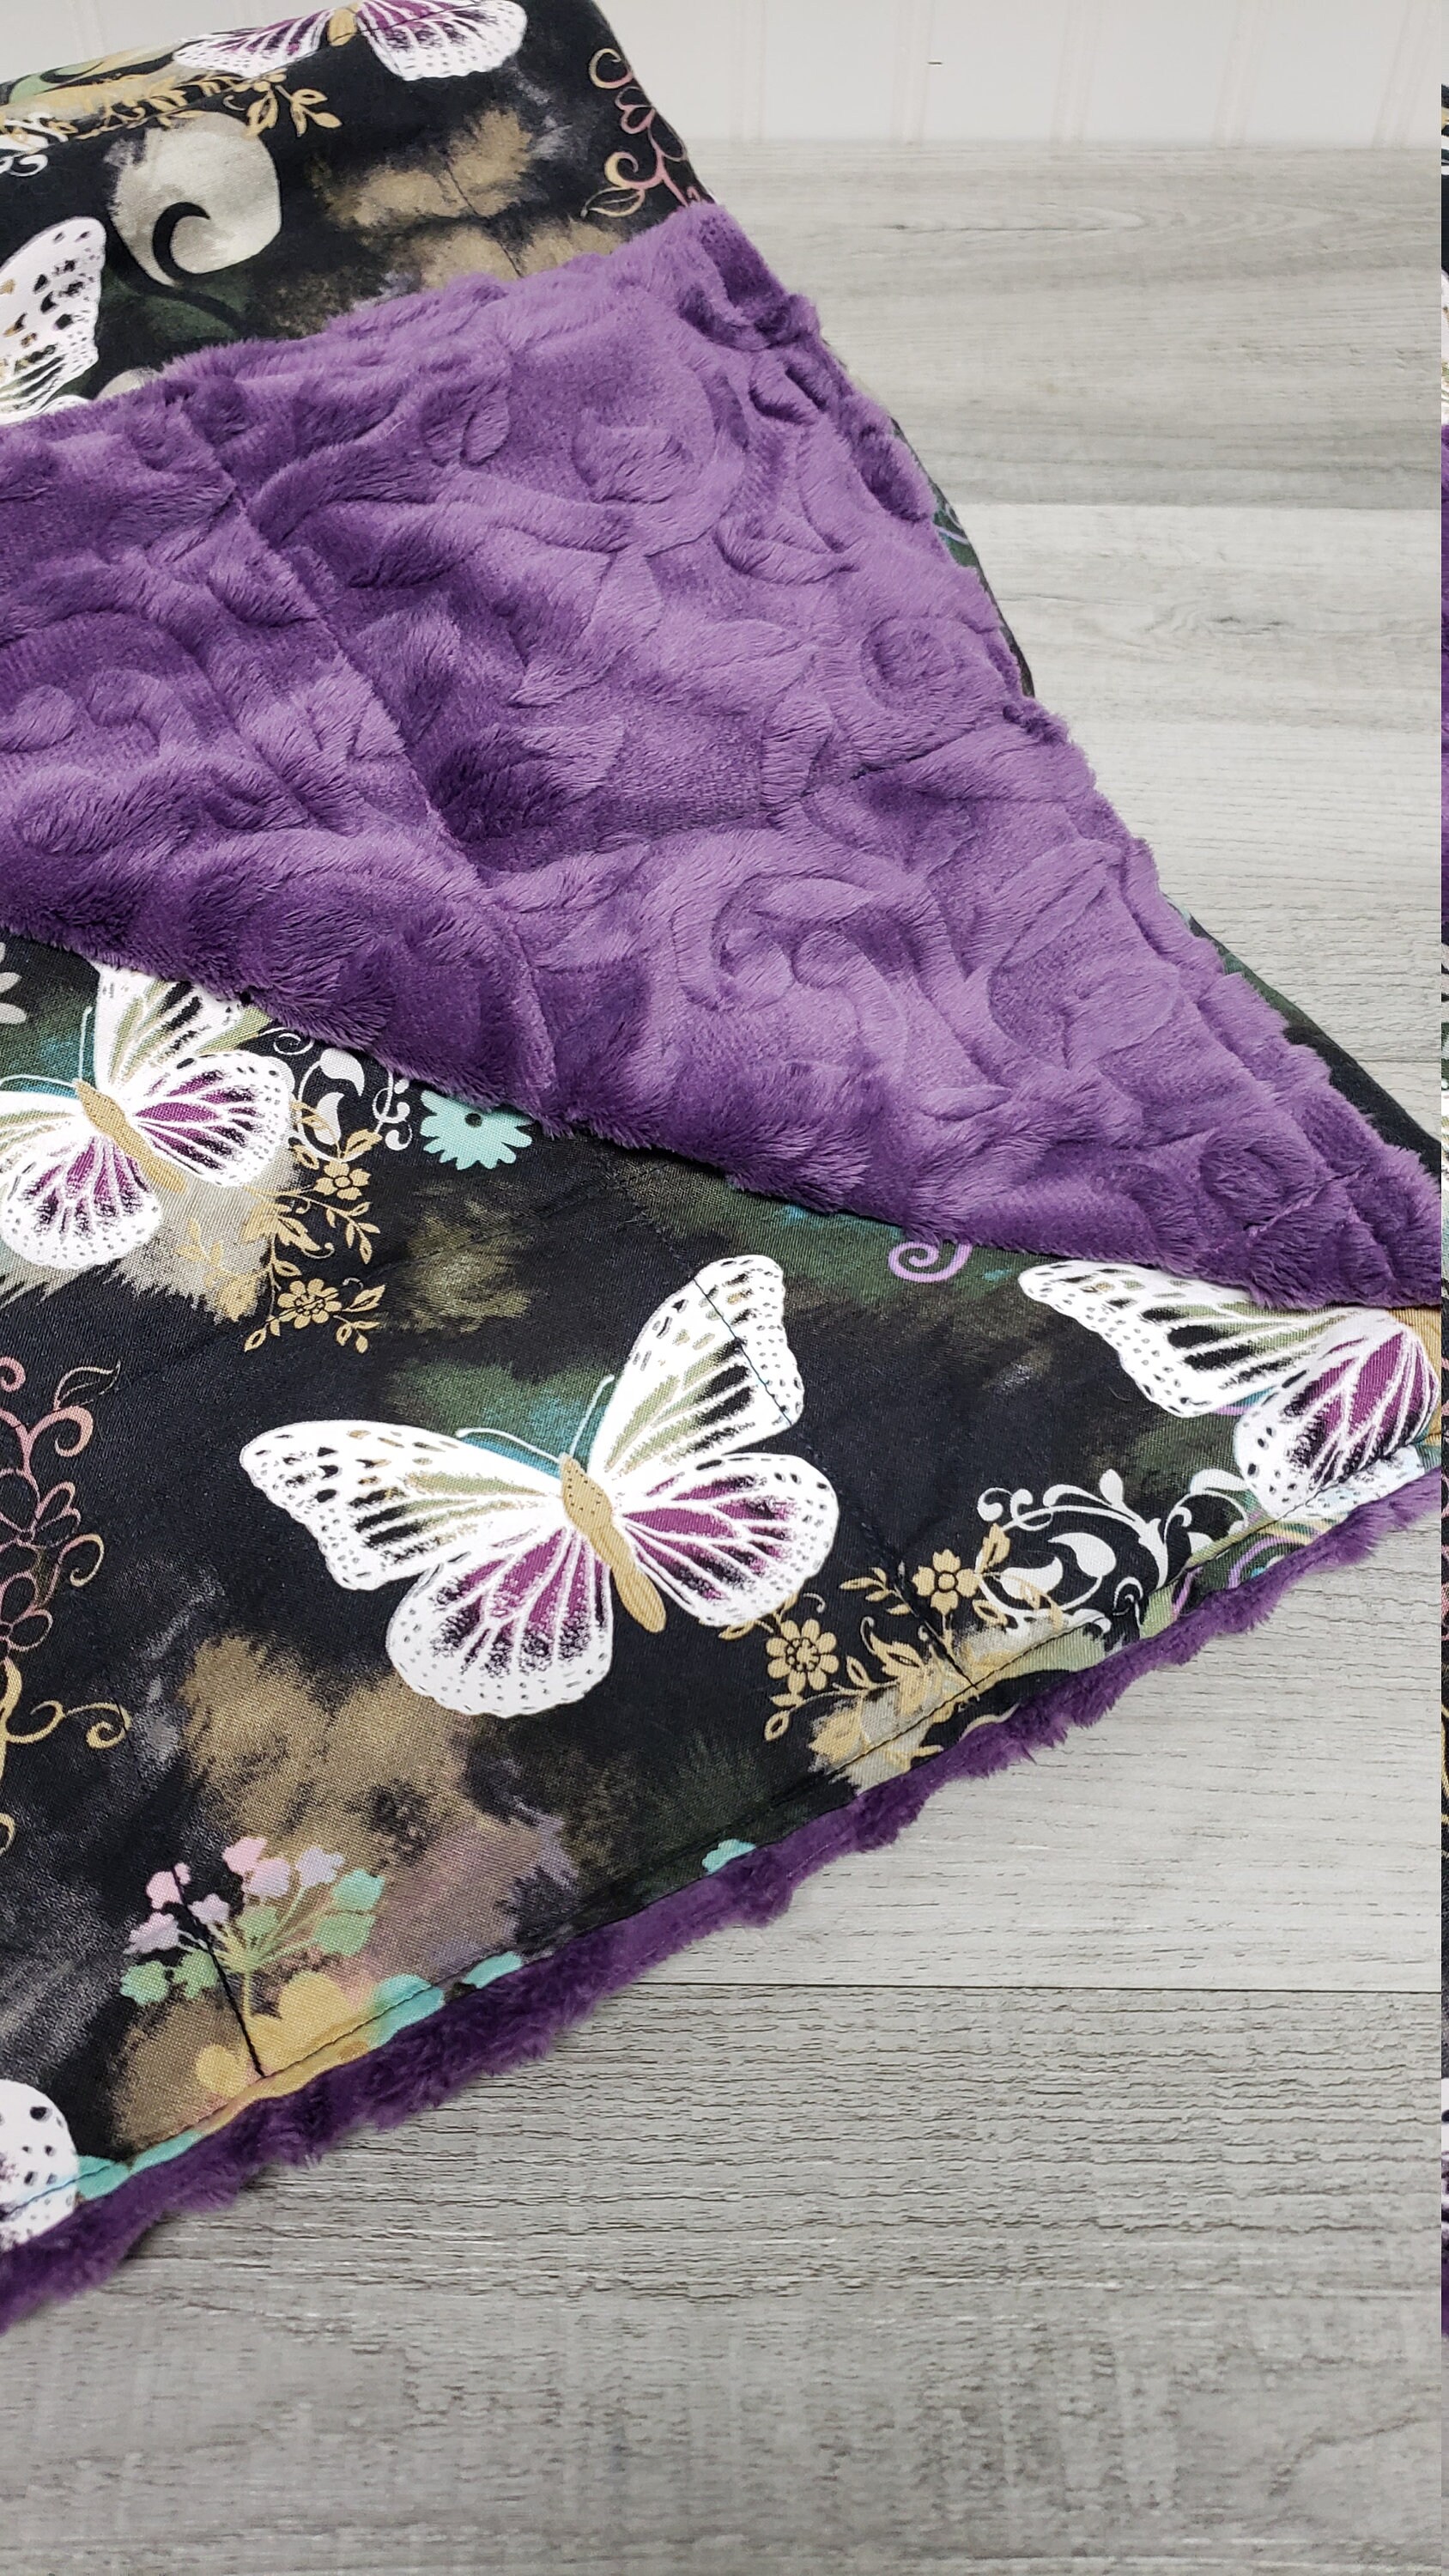 Weighted Blanket Adult Fibromyalgia Weighted Blanket | Etsy